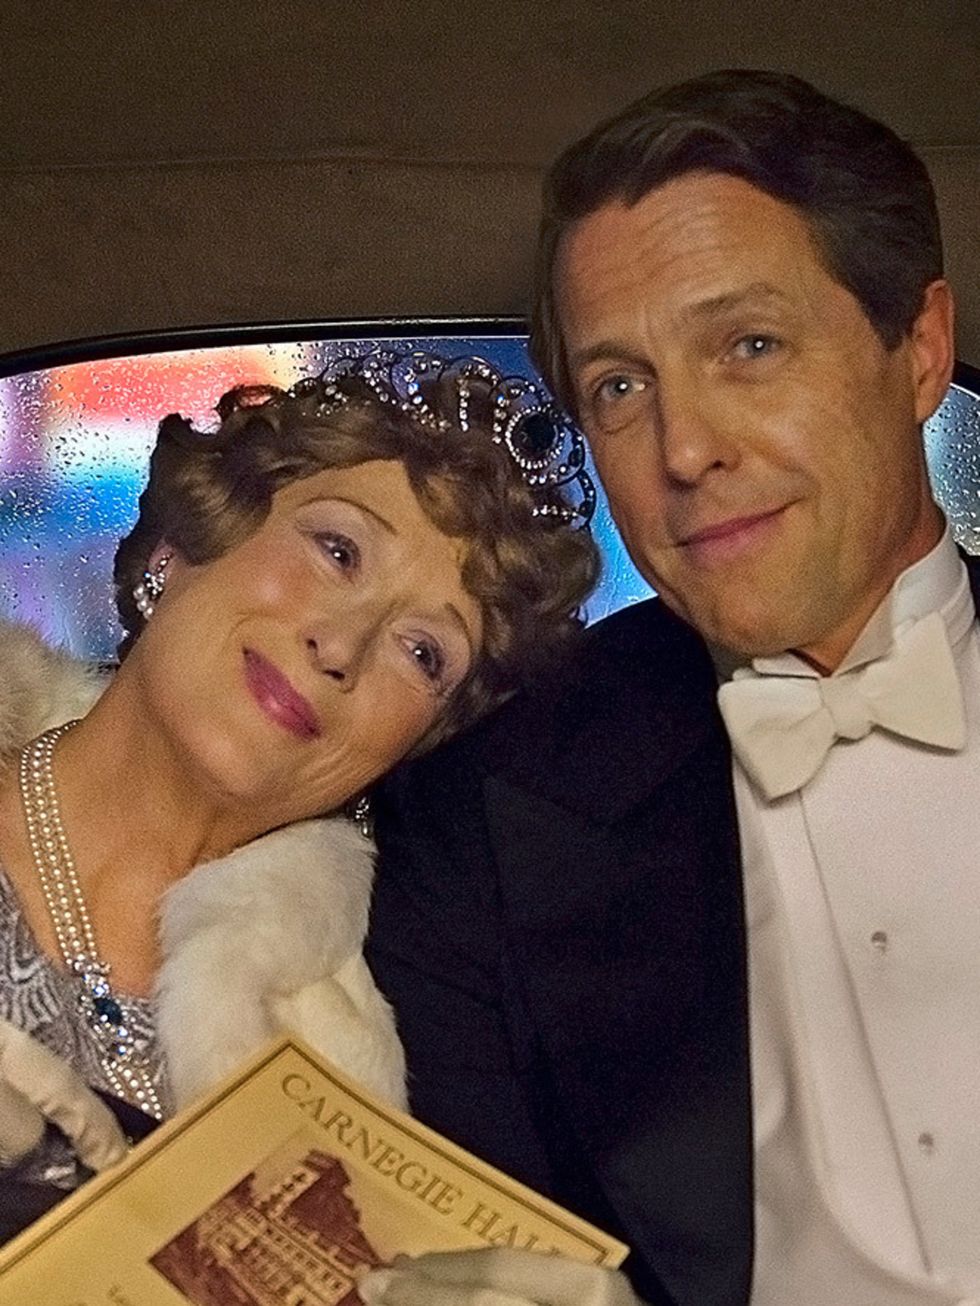 <p>FILM: Florence Foster Jenkins</p>

<p>Some questions in life, you should always say yes to. Like, More champagne? Or: Shall we see the latest Meryl Streep film? And the rule holds true with Florence Foster Jenkins, in which she shines as the notori